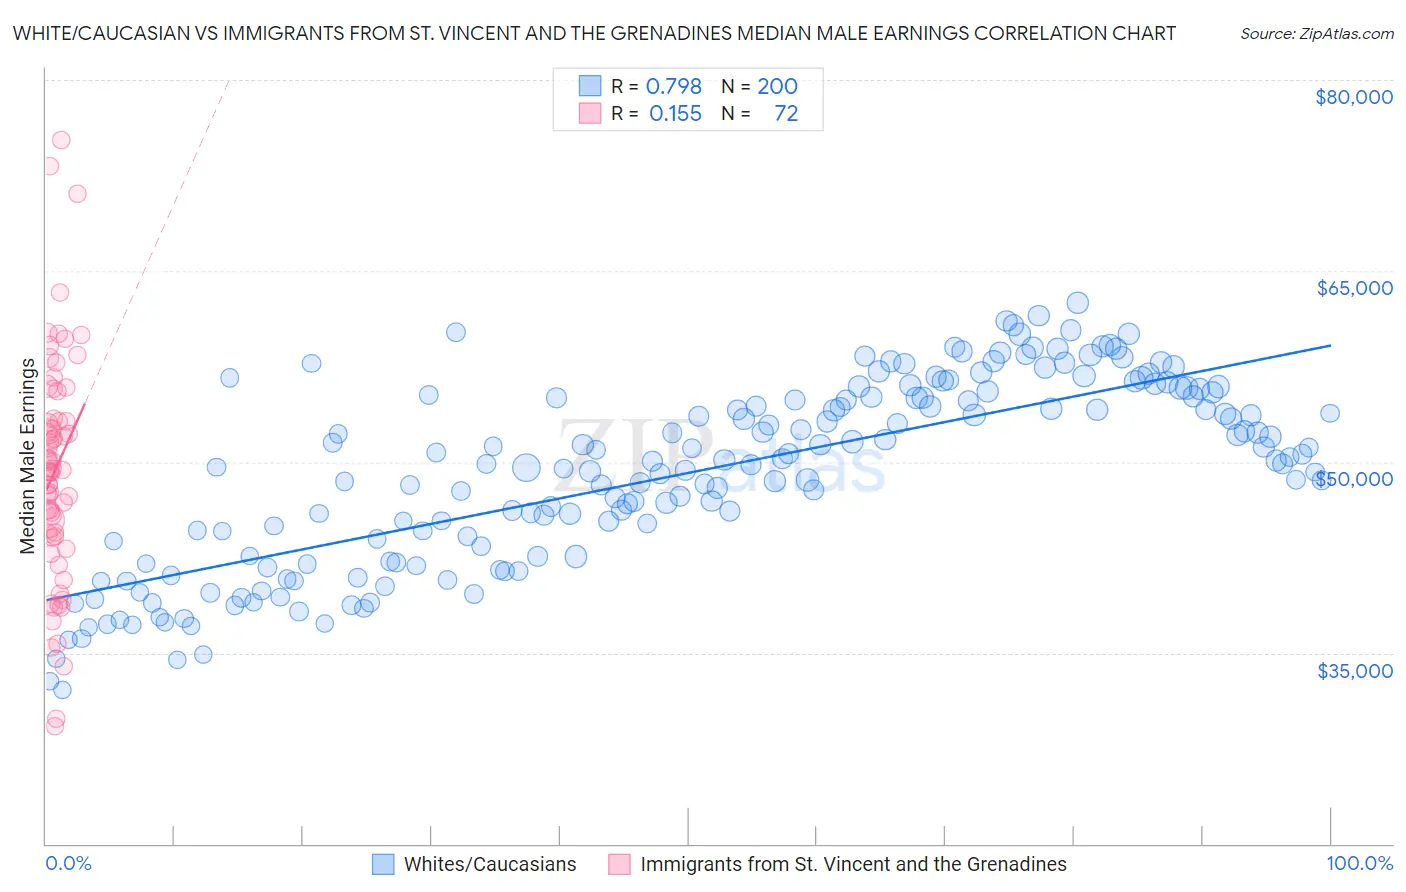 White/Caucasian vs Immigrants from St. Vincent and the Grenadines Median Male Earnings